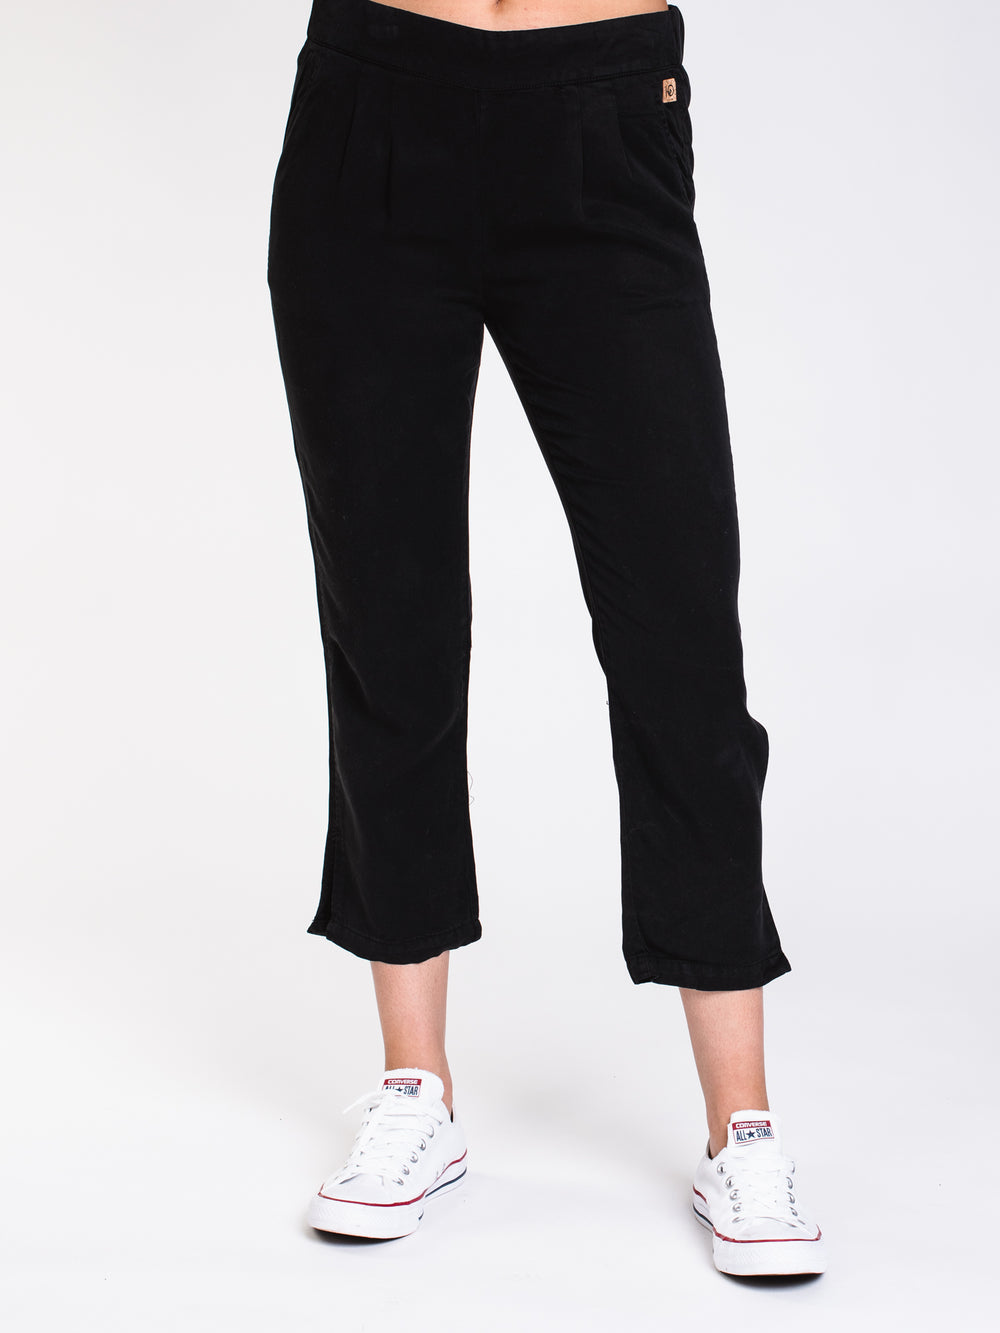 WOMENS LANGFORD 7/8 PANT - BLACK - CLEARANCE